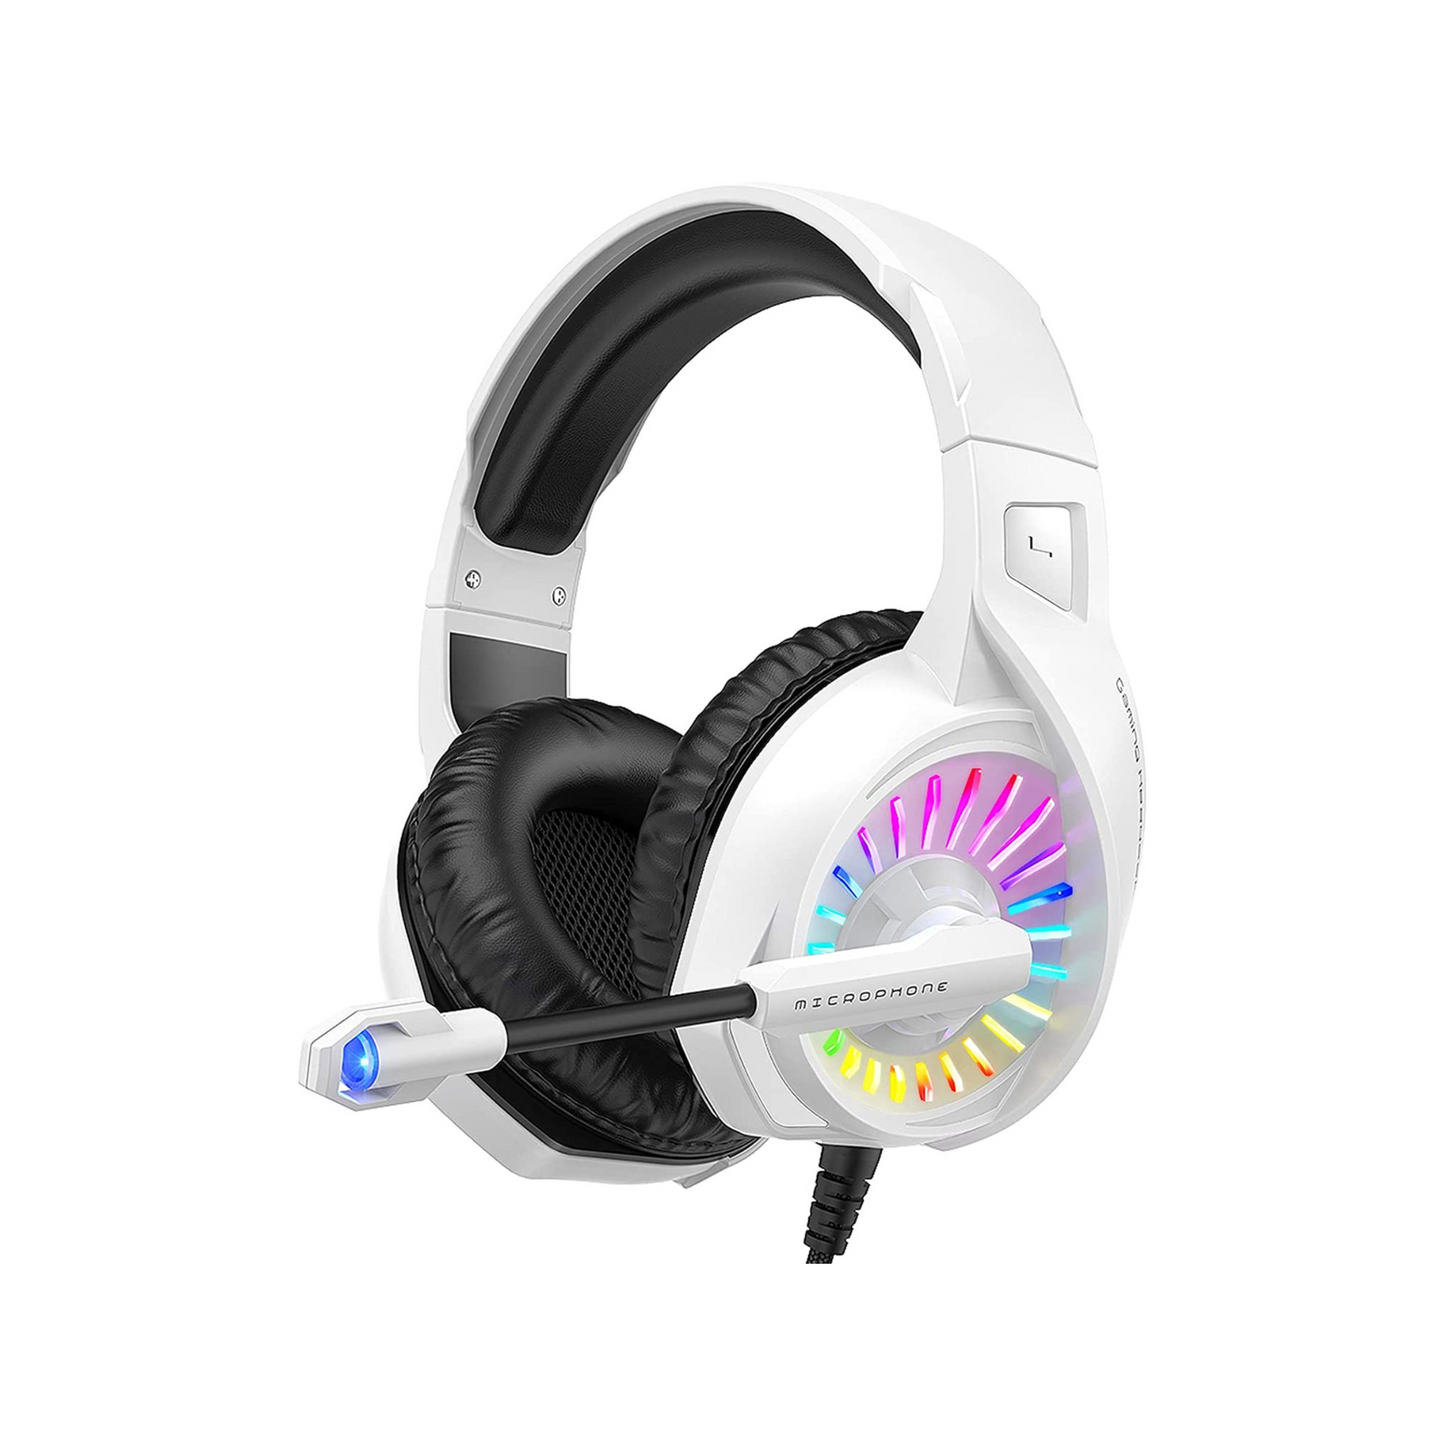 Gaming Headset with Microphone, Wired Headset with RGB Light. (White)